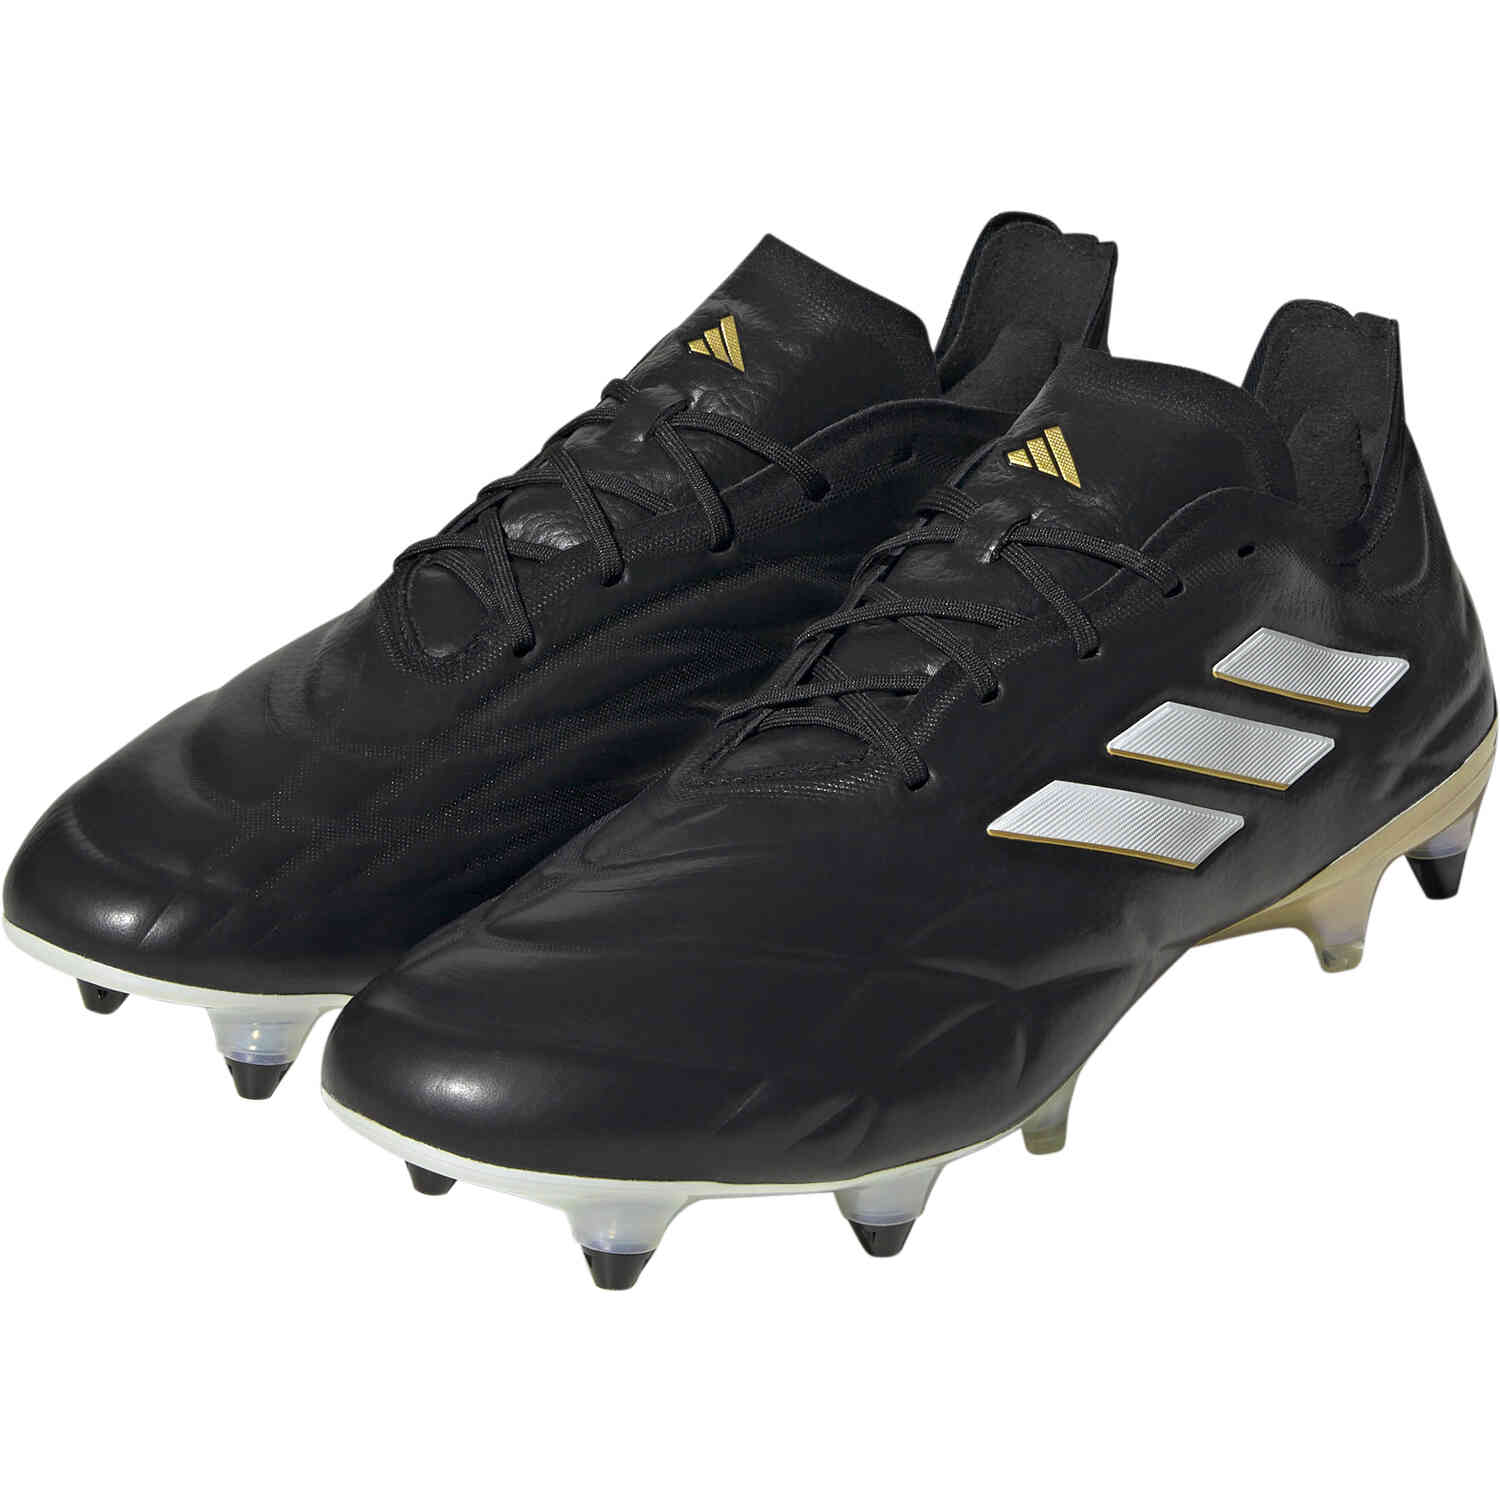 adidas Copa Pure+ SG Soft Ground Cleats - Black, & Metallic Gold - Soccer